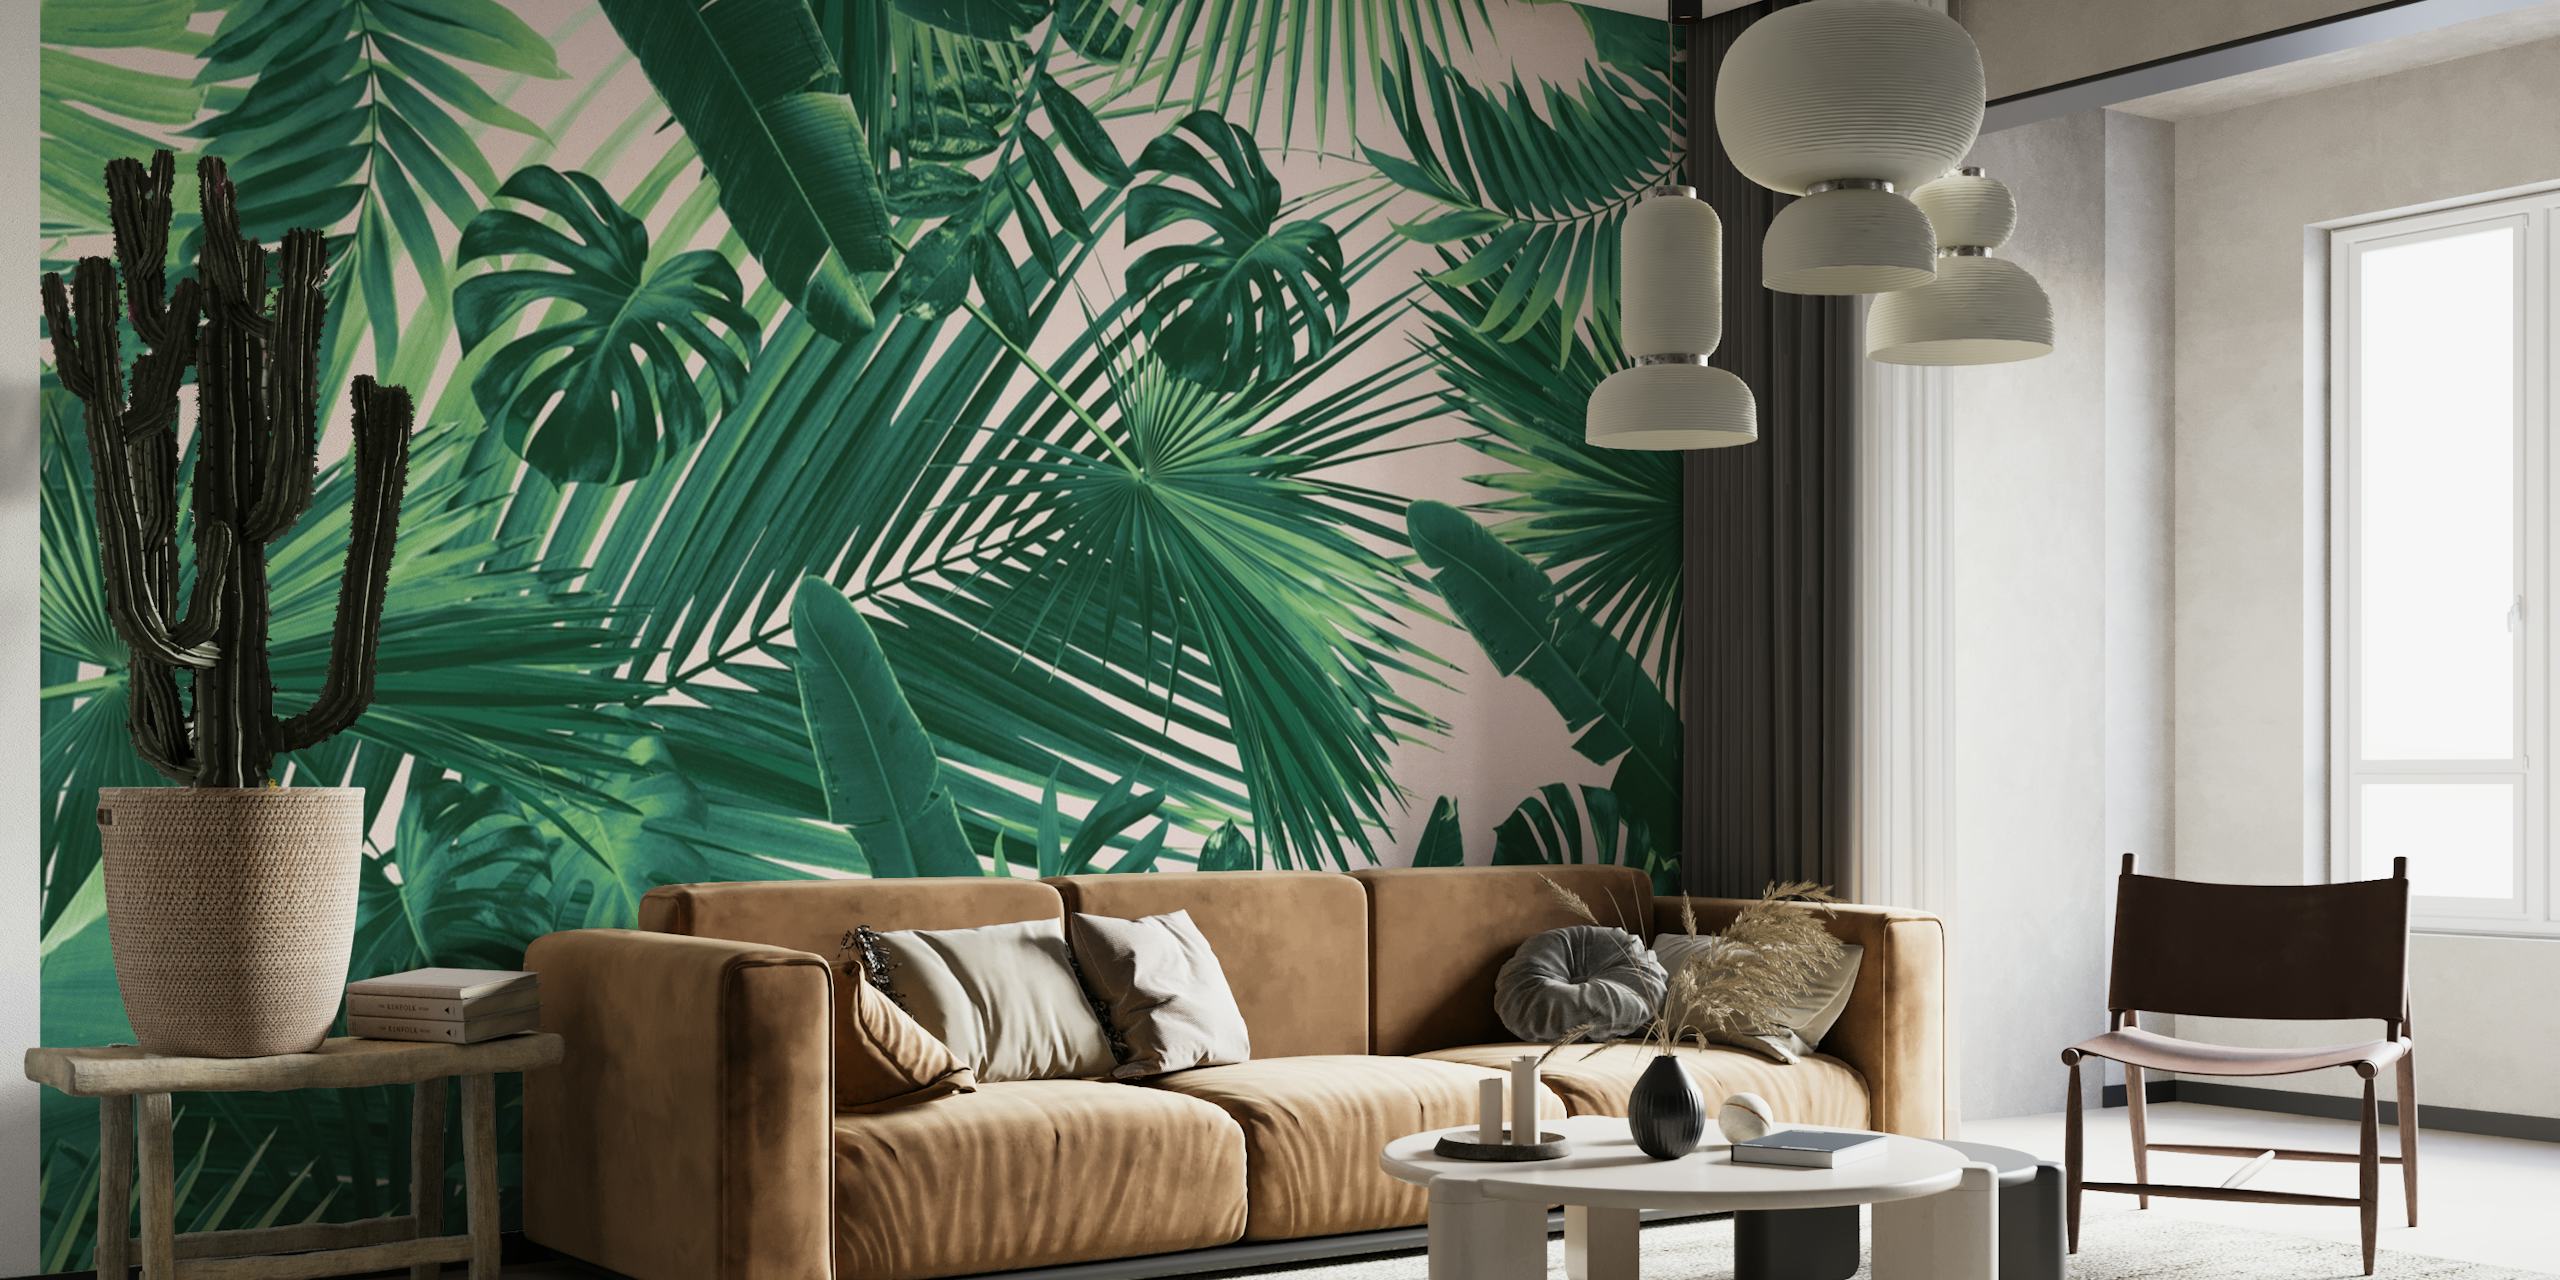 A wall mural with a design of dense jungle leaves in various shades of green, creating a peaceful tropical atmosphere.